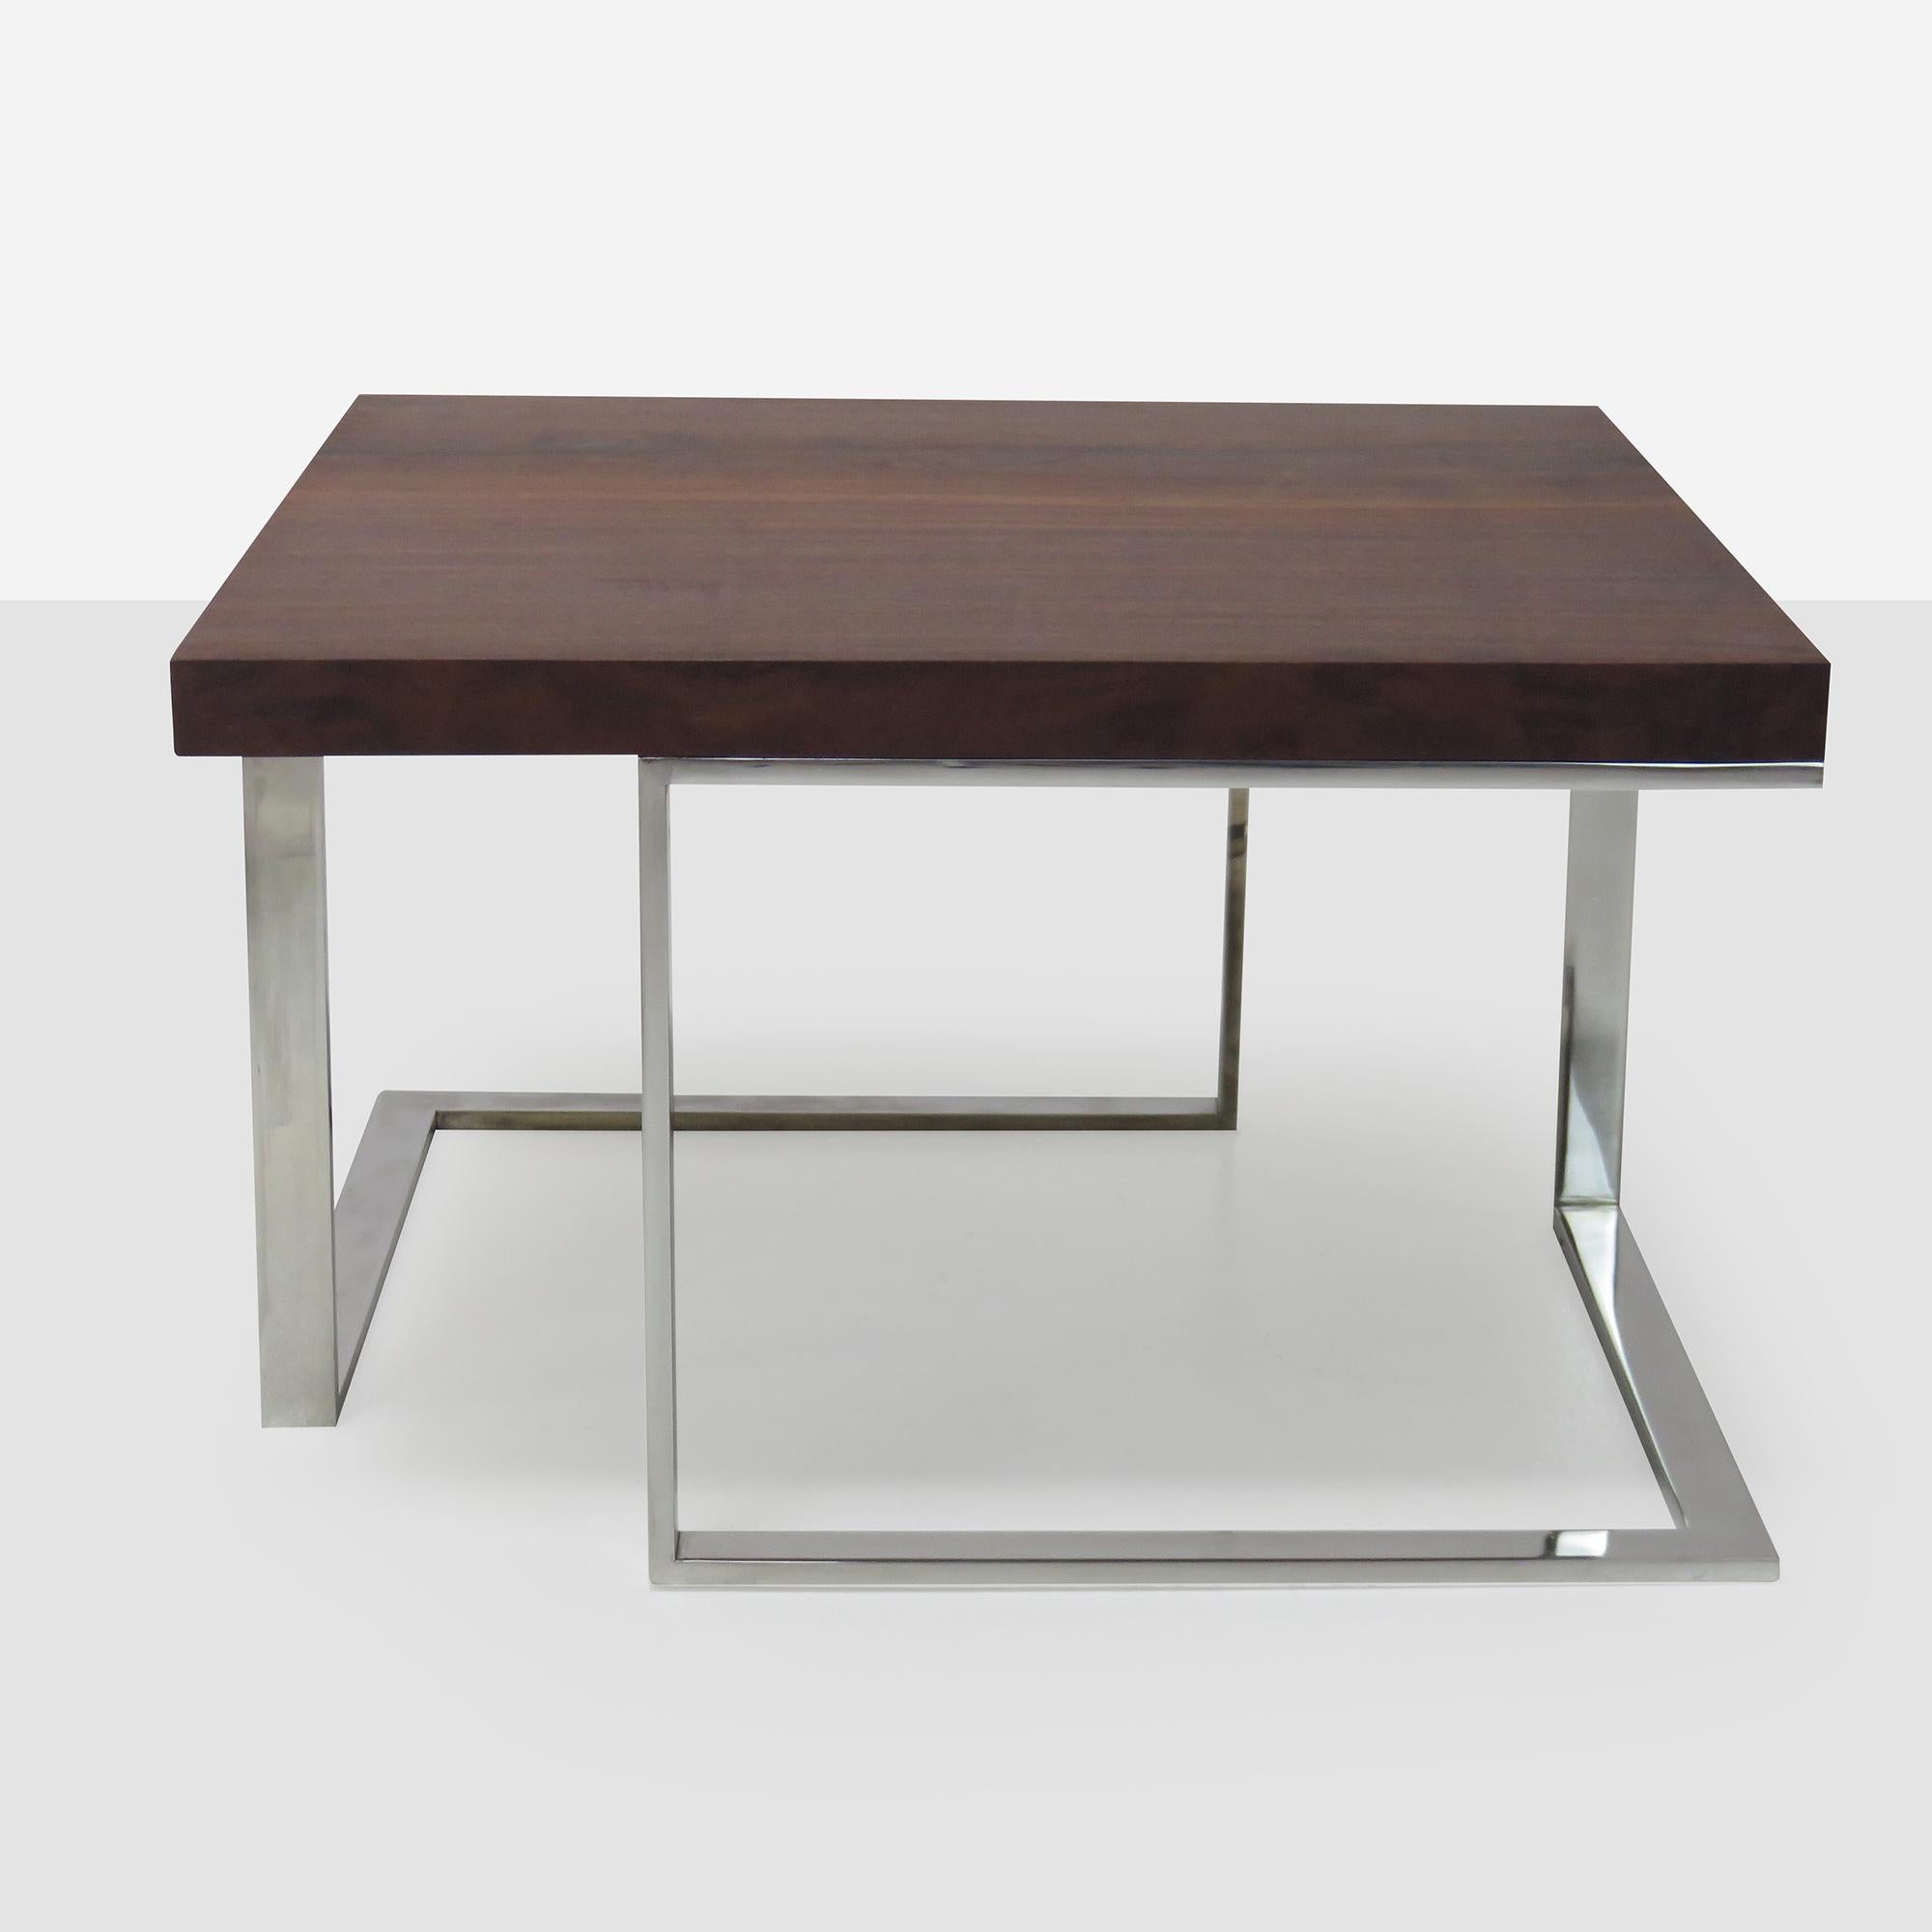 Walnut & Chrome Coffee Table In Good Condition For Sale In San Francisco, CA